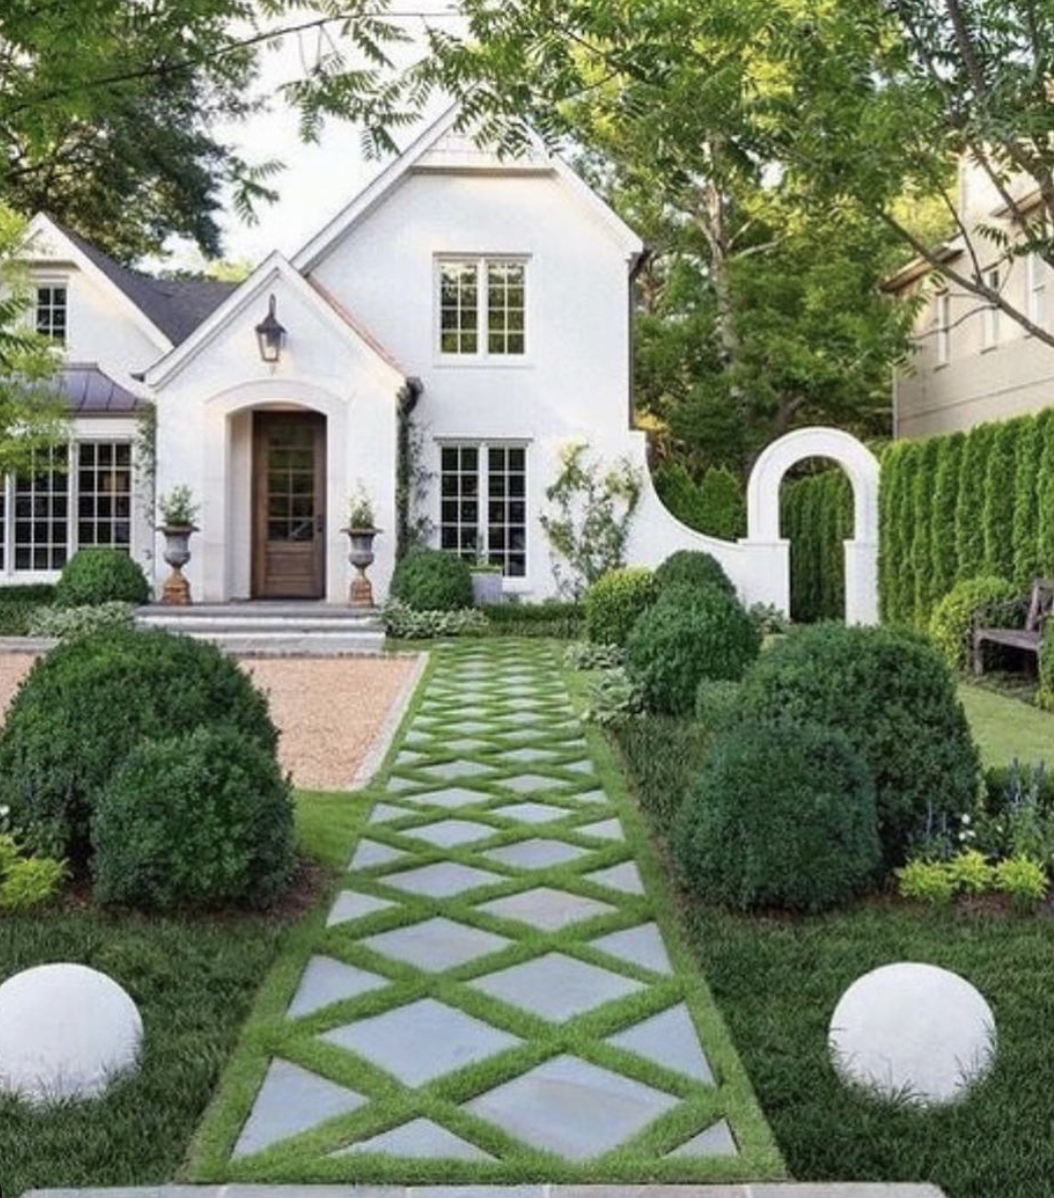 Landscaping Ideas for Instant Curb Appeal; Landscape design ideas that will help your house stand out from the neighbors. The easy, low-cost, and smart ways to create curb appeal